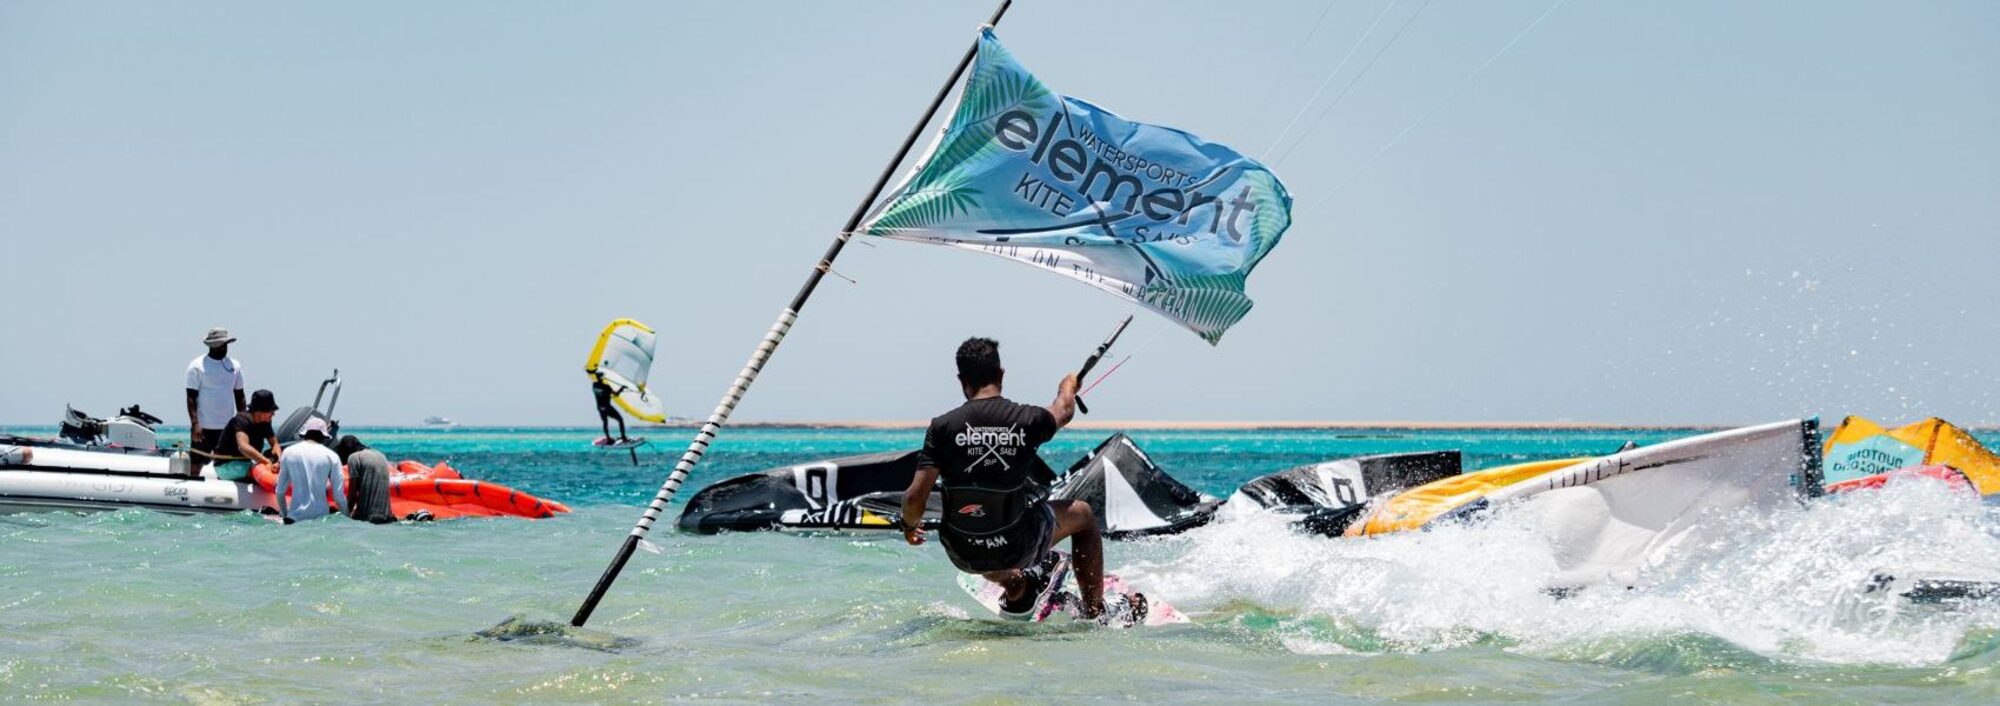 011-element-watersports-somabay